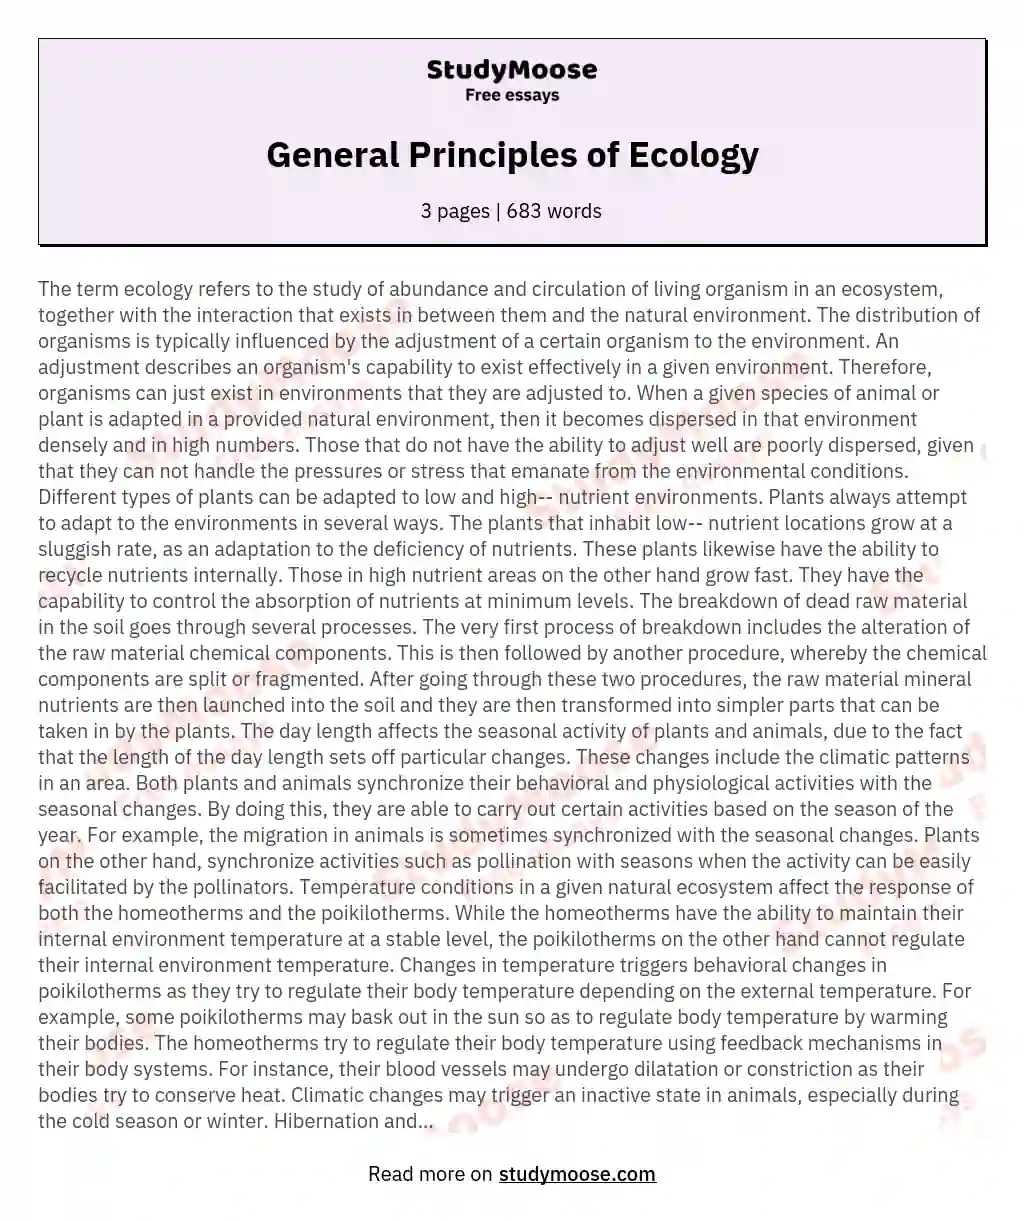 General Principles of Ecology